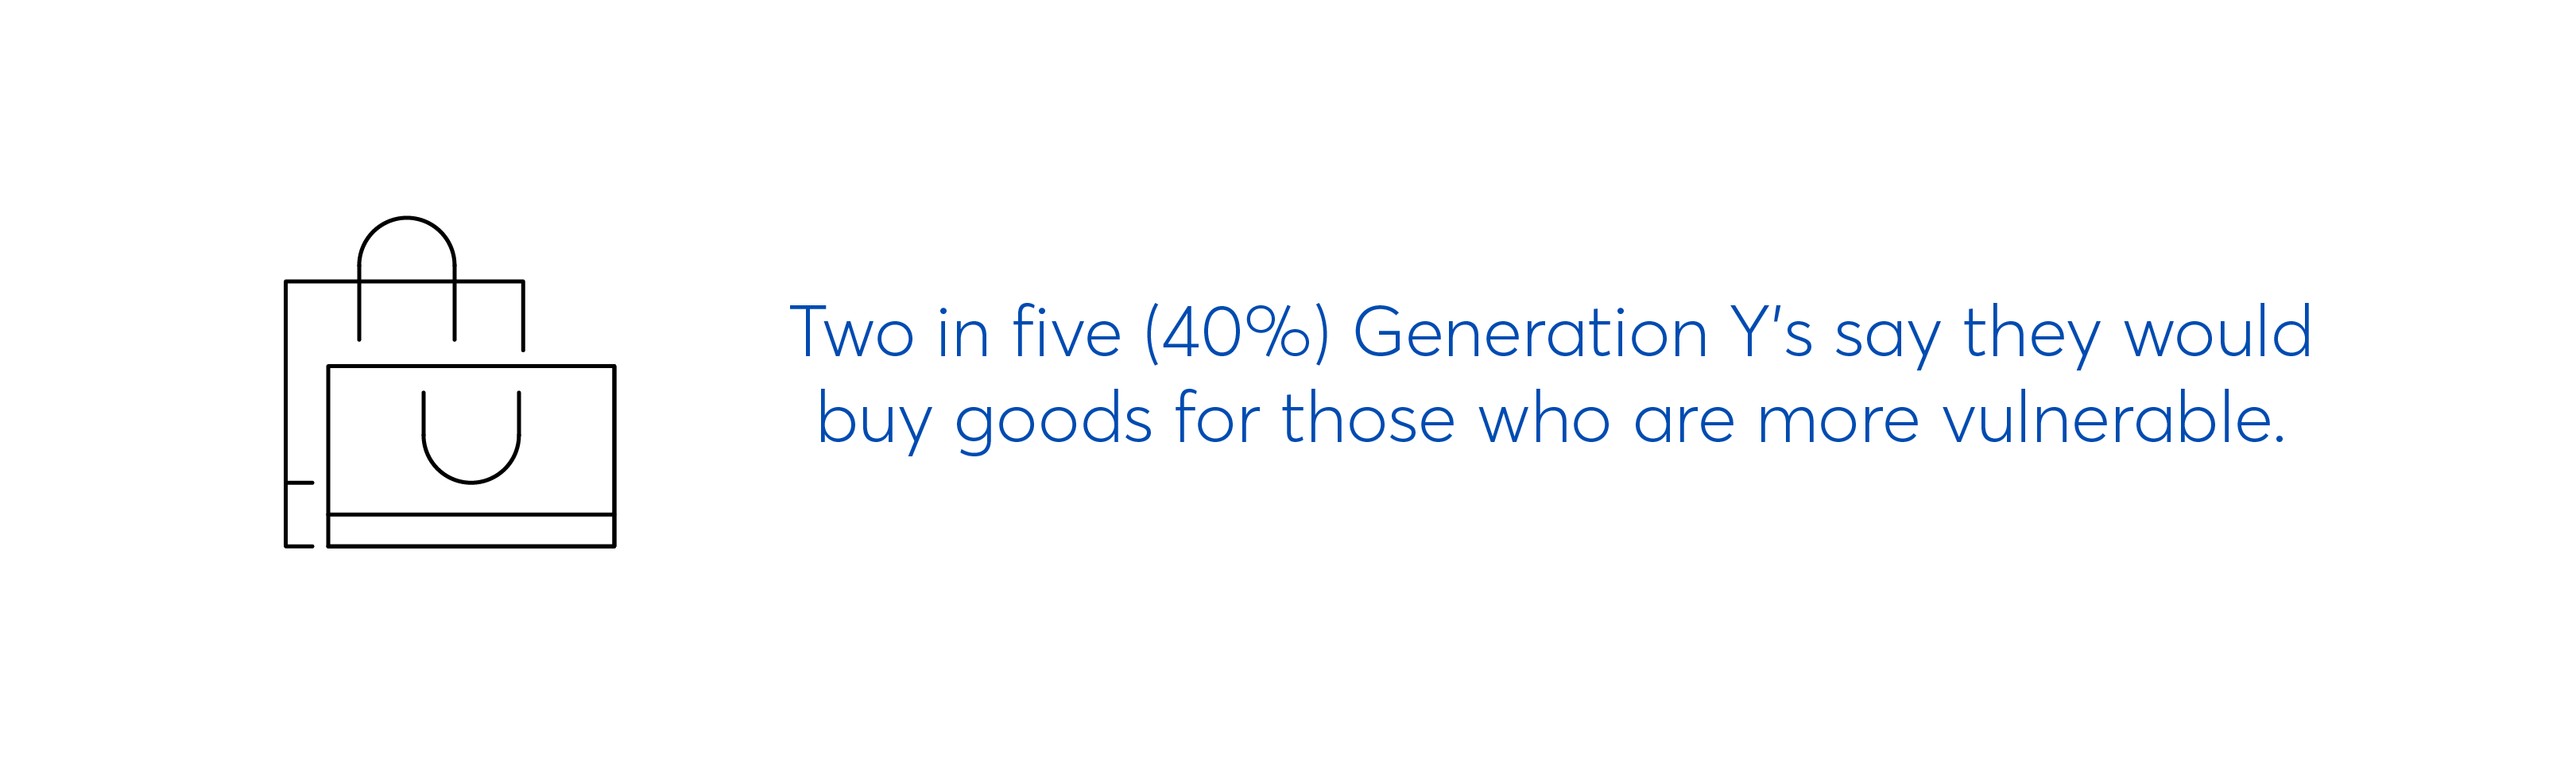 20% of Gen Y would buy goods for the vulnerable